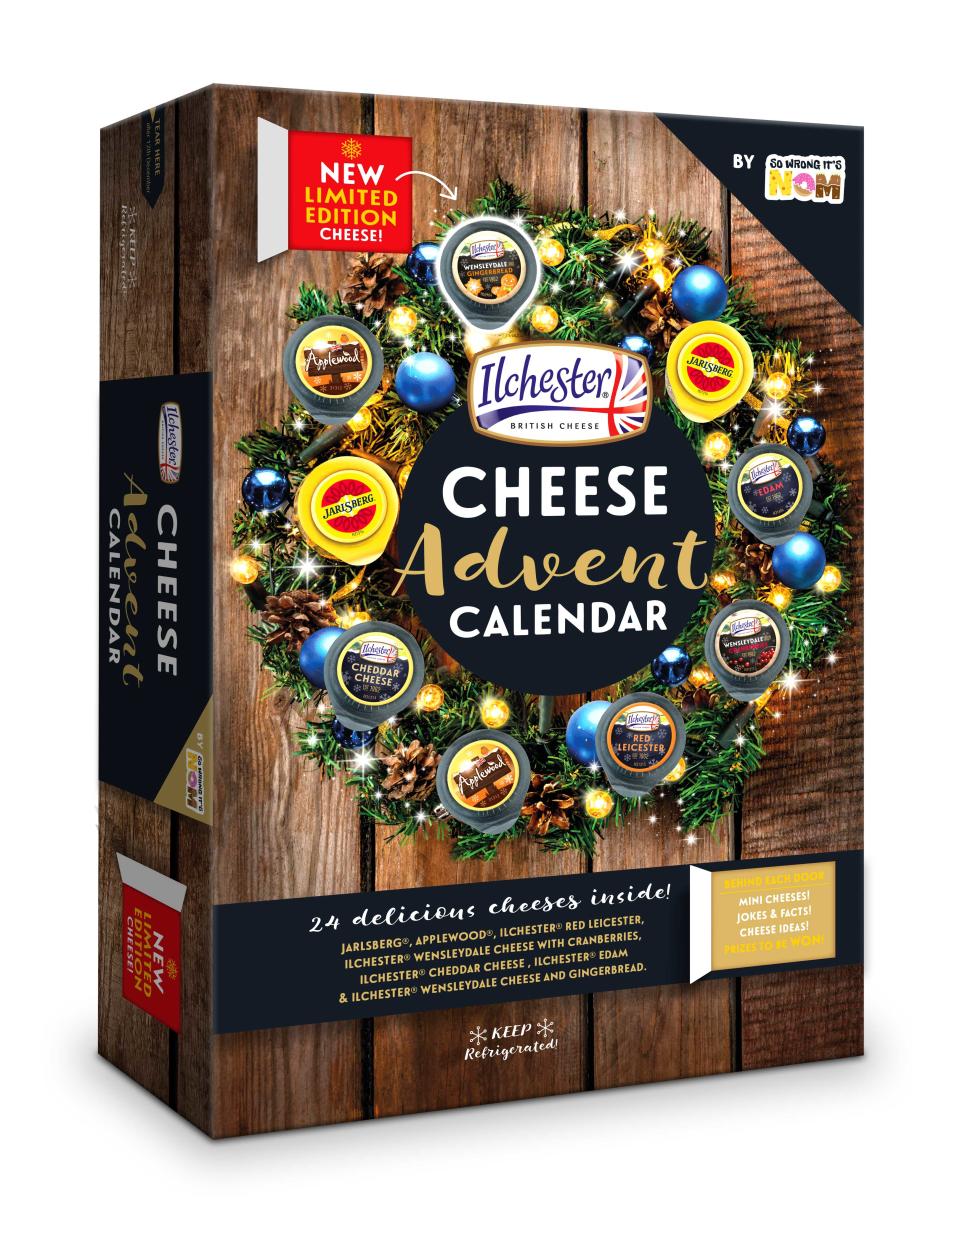 The Ilchester cheese advent calendar will be available in Sainsbury’s from November 14 [Photo: So Wrong It’s Nom]